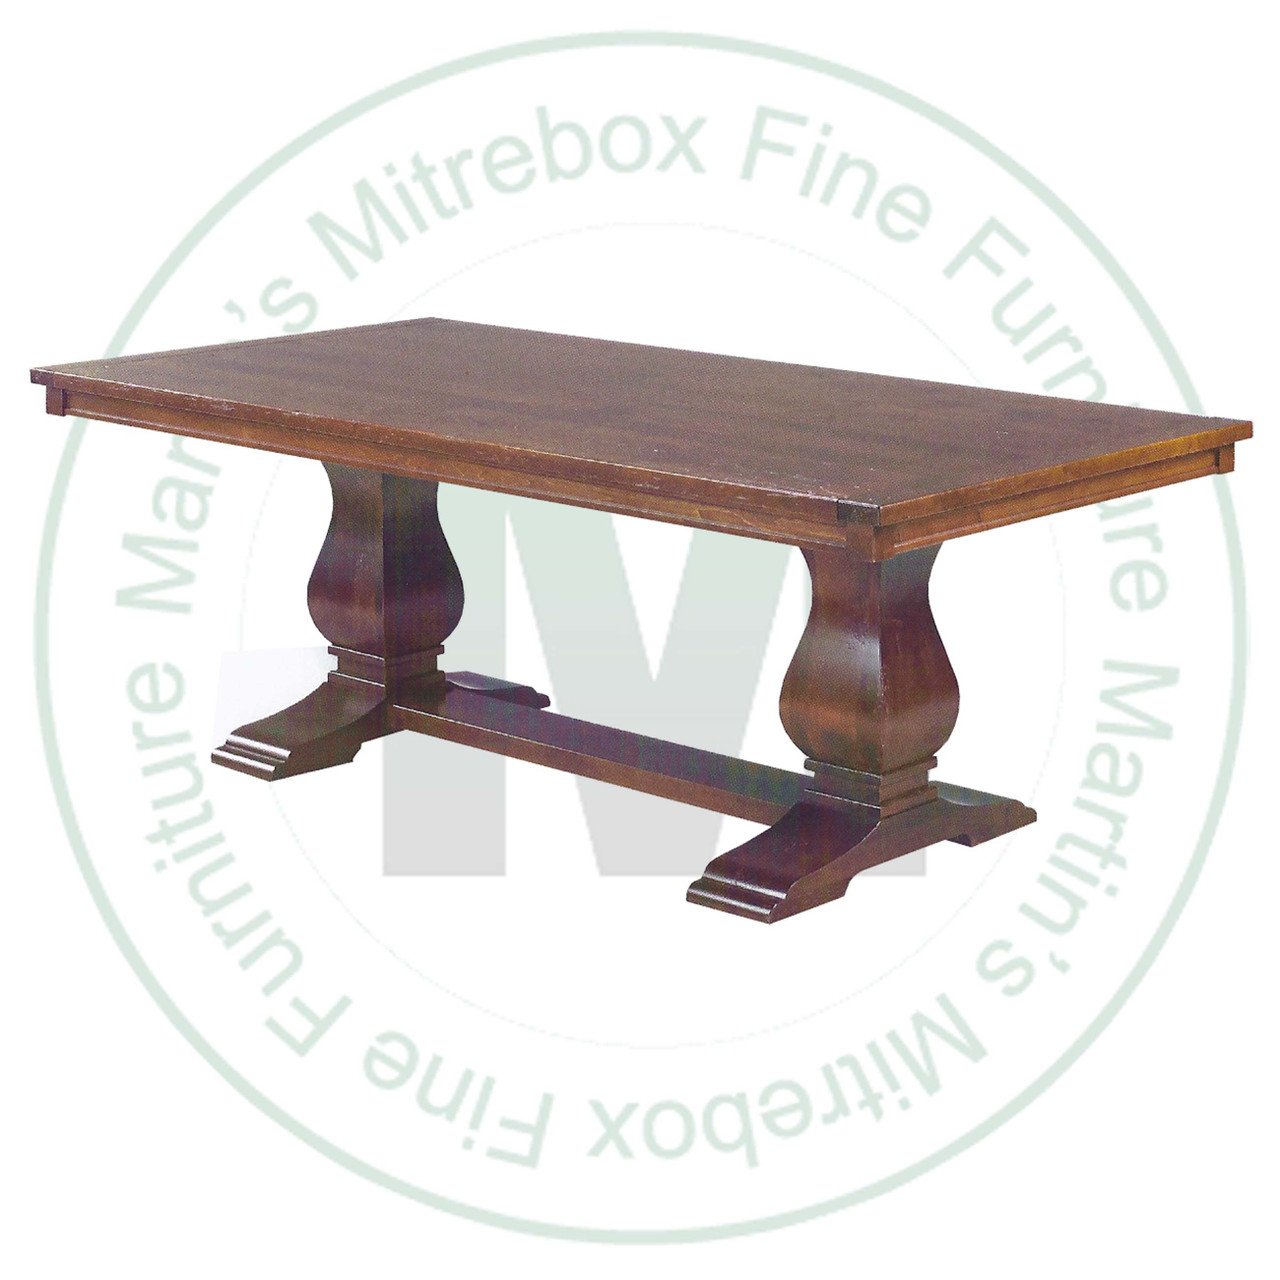 Maple Socrates Double Pedestal Table 54''D x 72''W x 30''H With 3 - 12'' Leaves. Table Has 1.25'' Thick Top